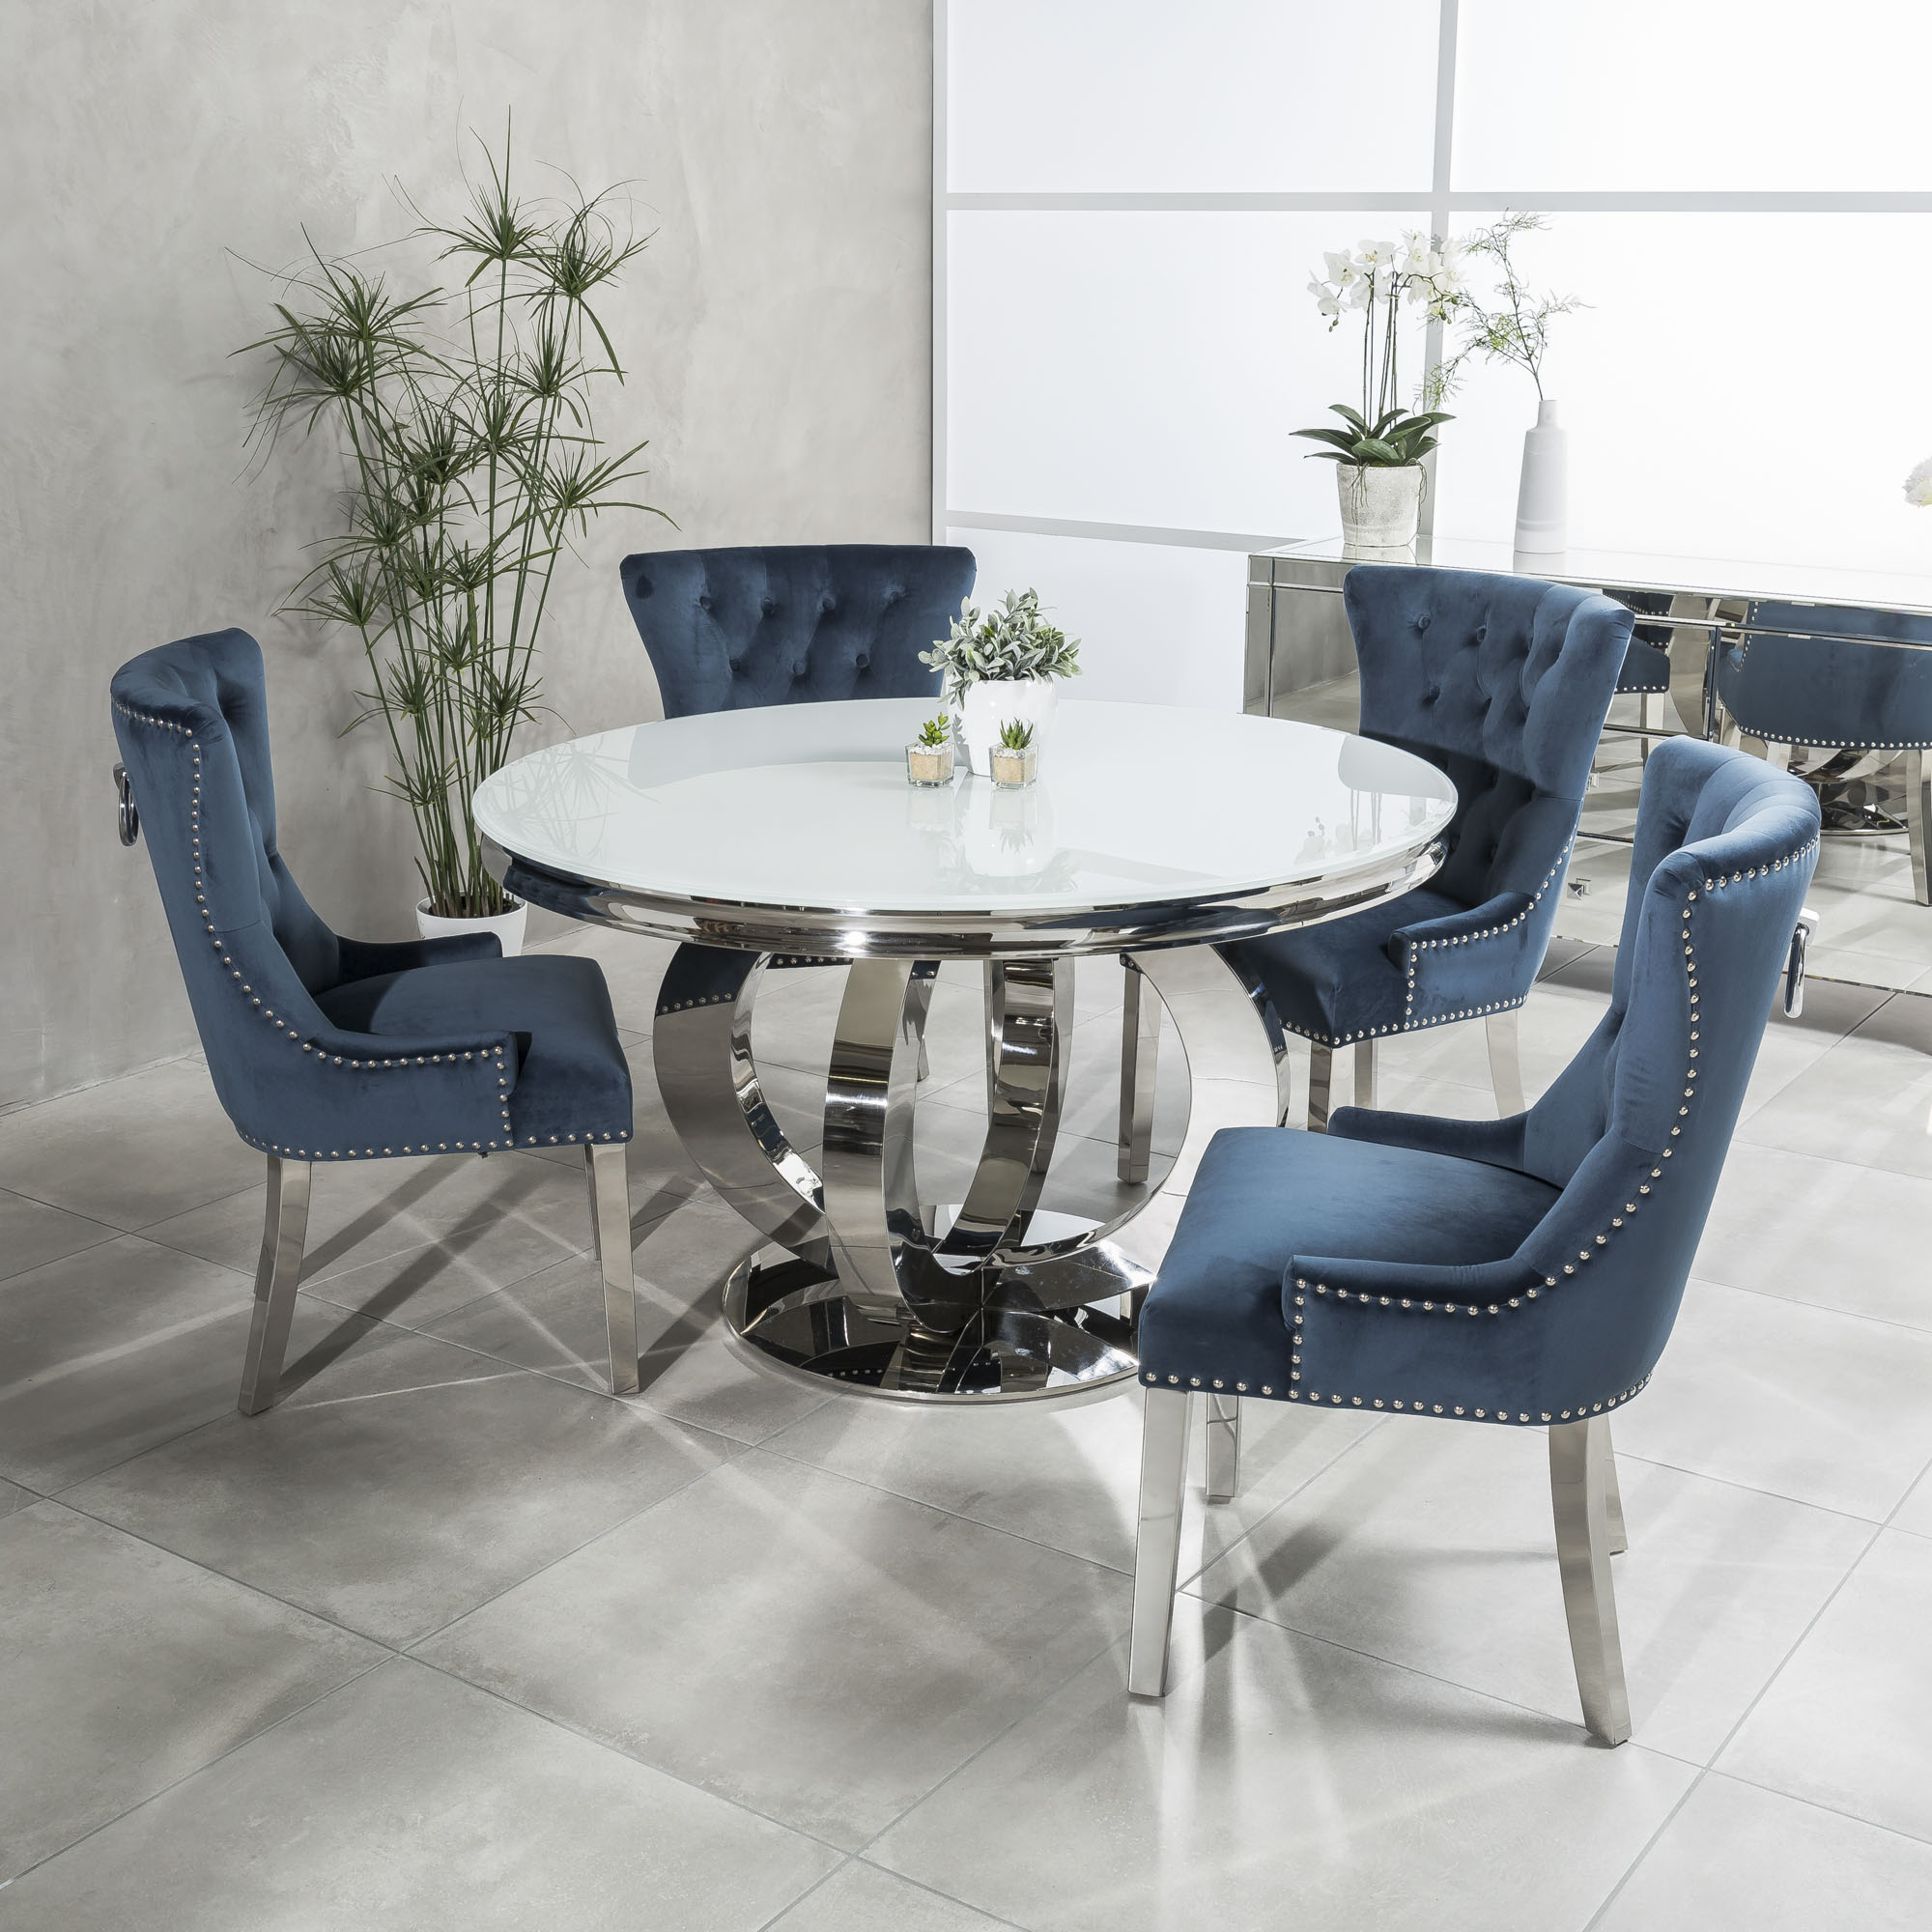 1.3m Circular Polished Steel Dining White Glass Table Set with 4 Royal Blue Brushed Velvet Dining Chairs